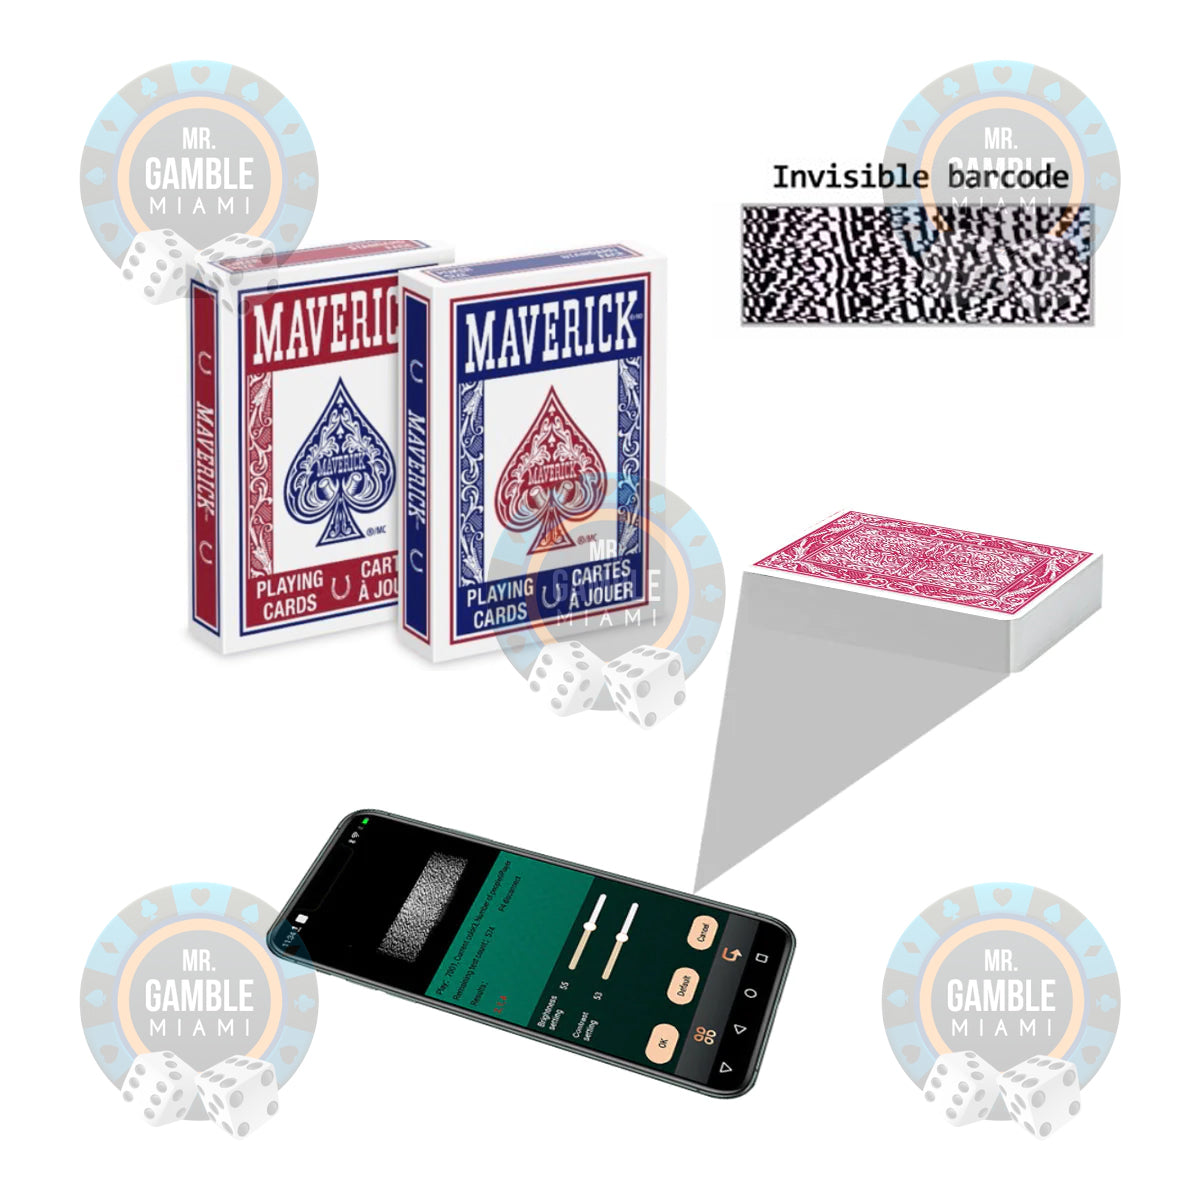 Barcode Marked Cards Maverick Regular - Martin Kabrhel's Choice for PPPoker Cheat and Poker Cheating Devices